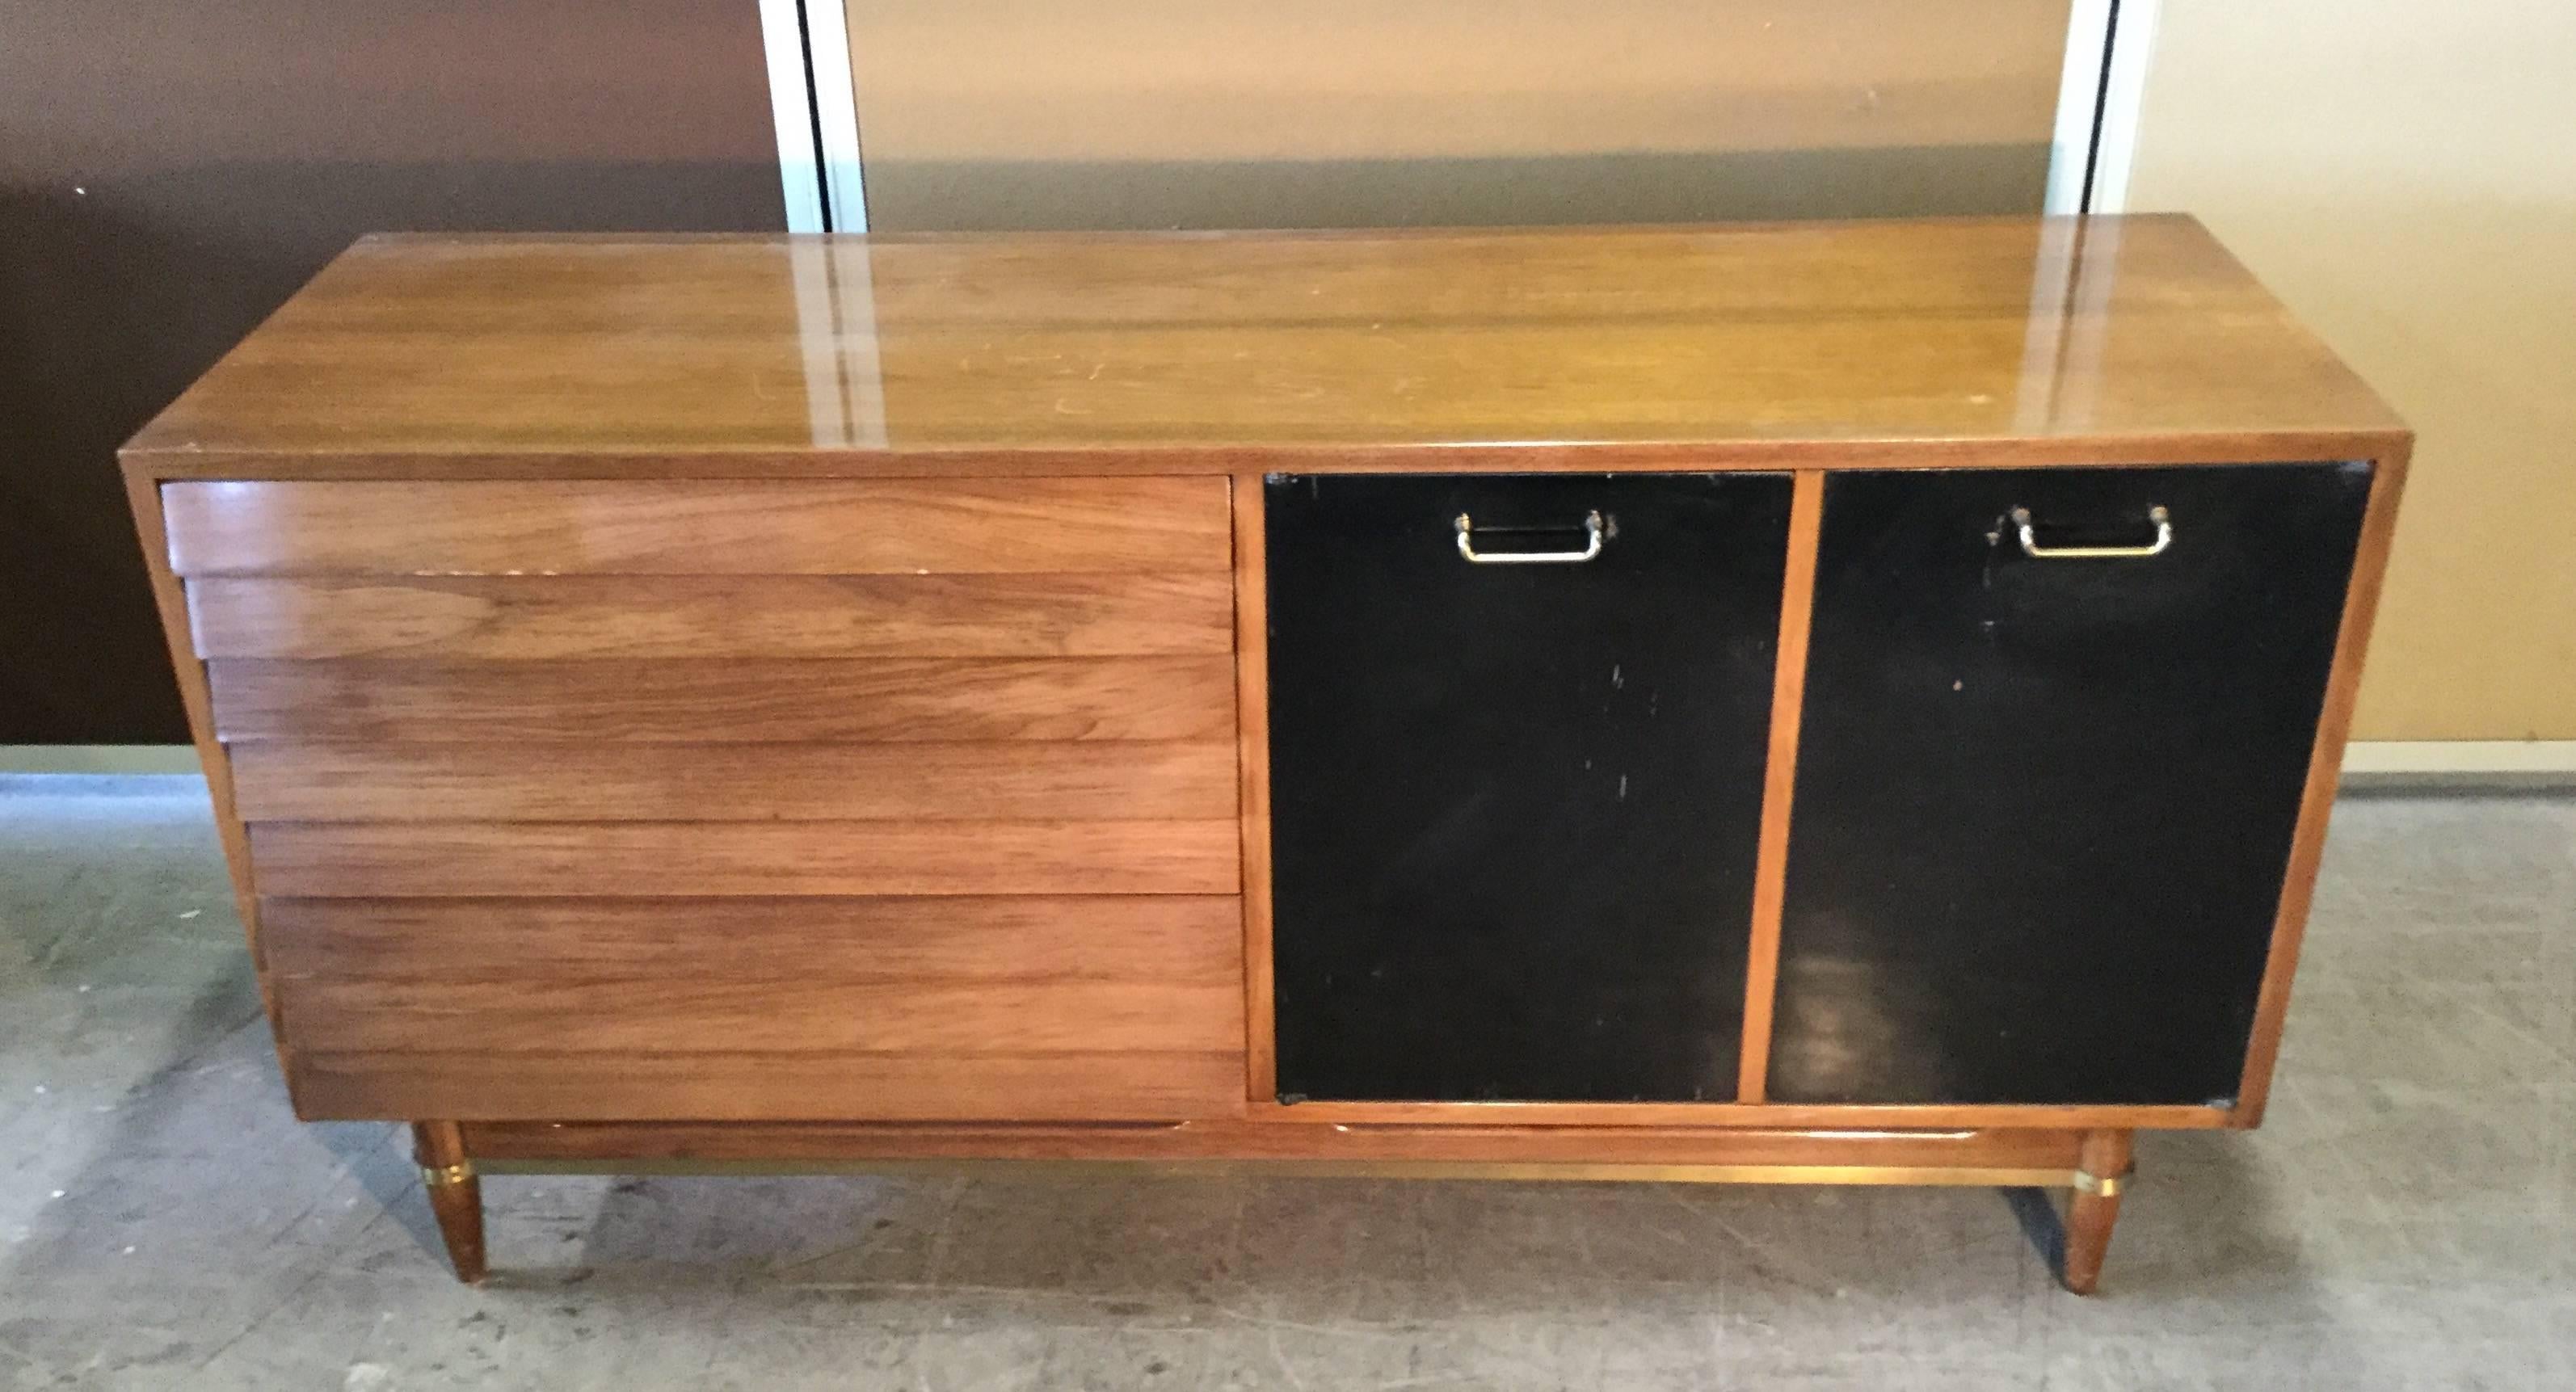 Classic Modernist walnut and brass server or credenza, American of Martinsville designed by Merton Gershun for his Dania collection. Credenza features walnut finish with louvered front drawers as well as two lacquered doors and drawers. Brass trim